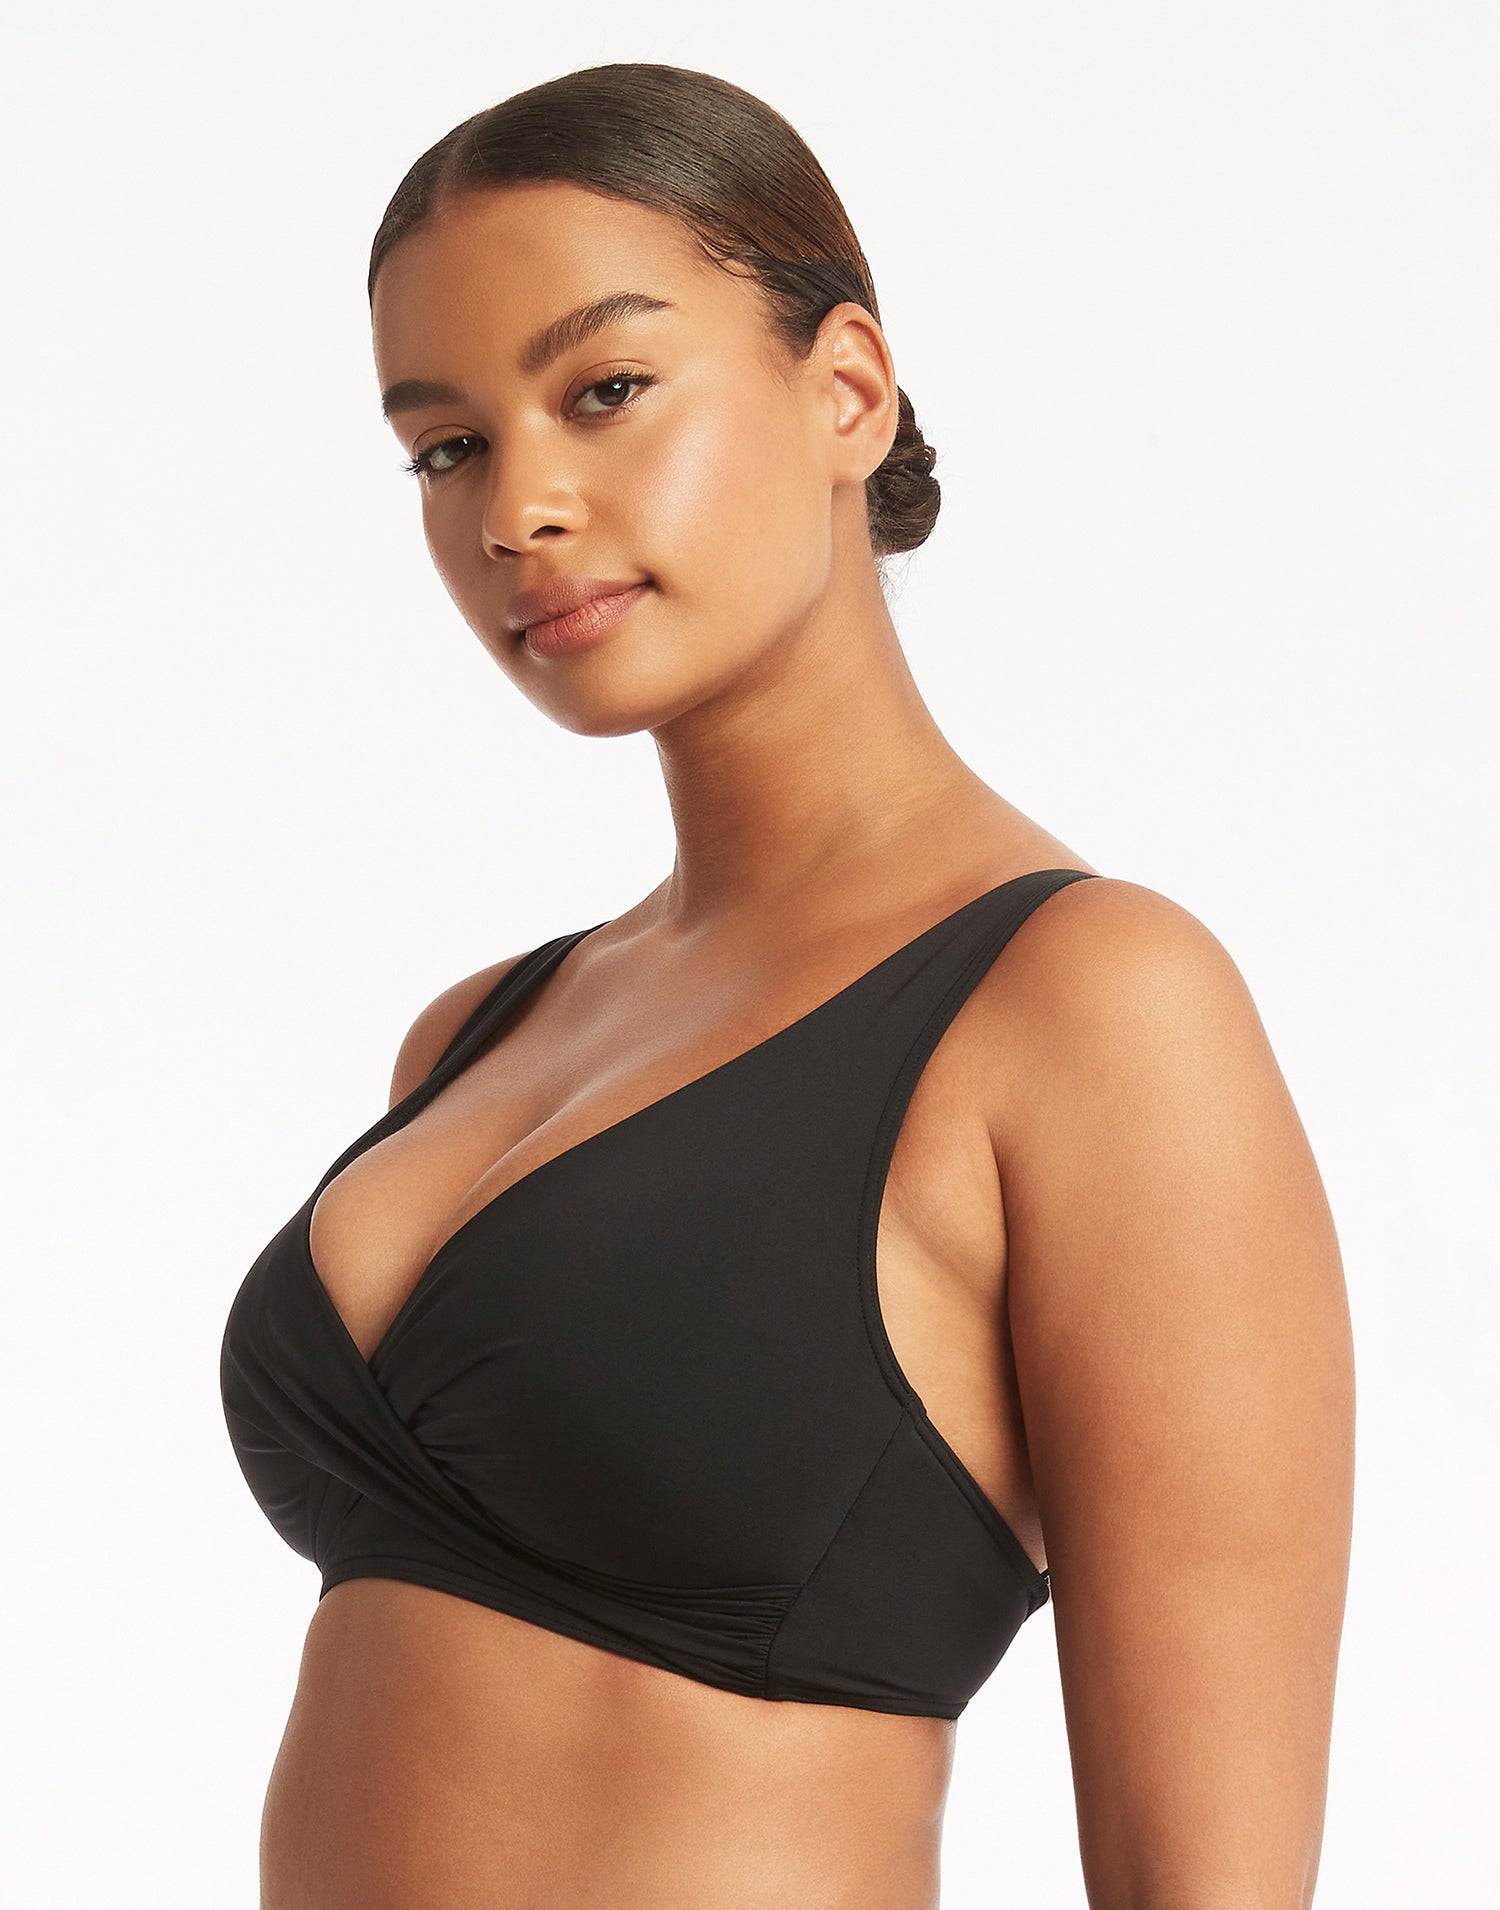 Essentials Multifit Halter Top by Sea Level in Black - Angled Detail View